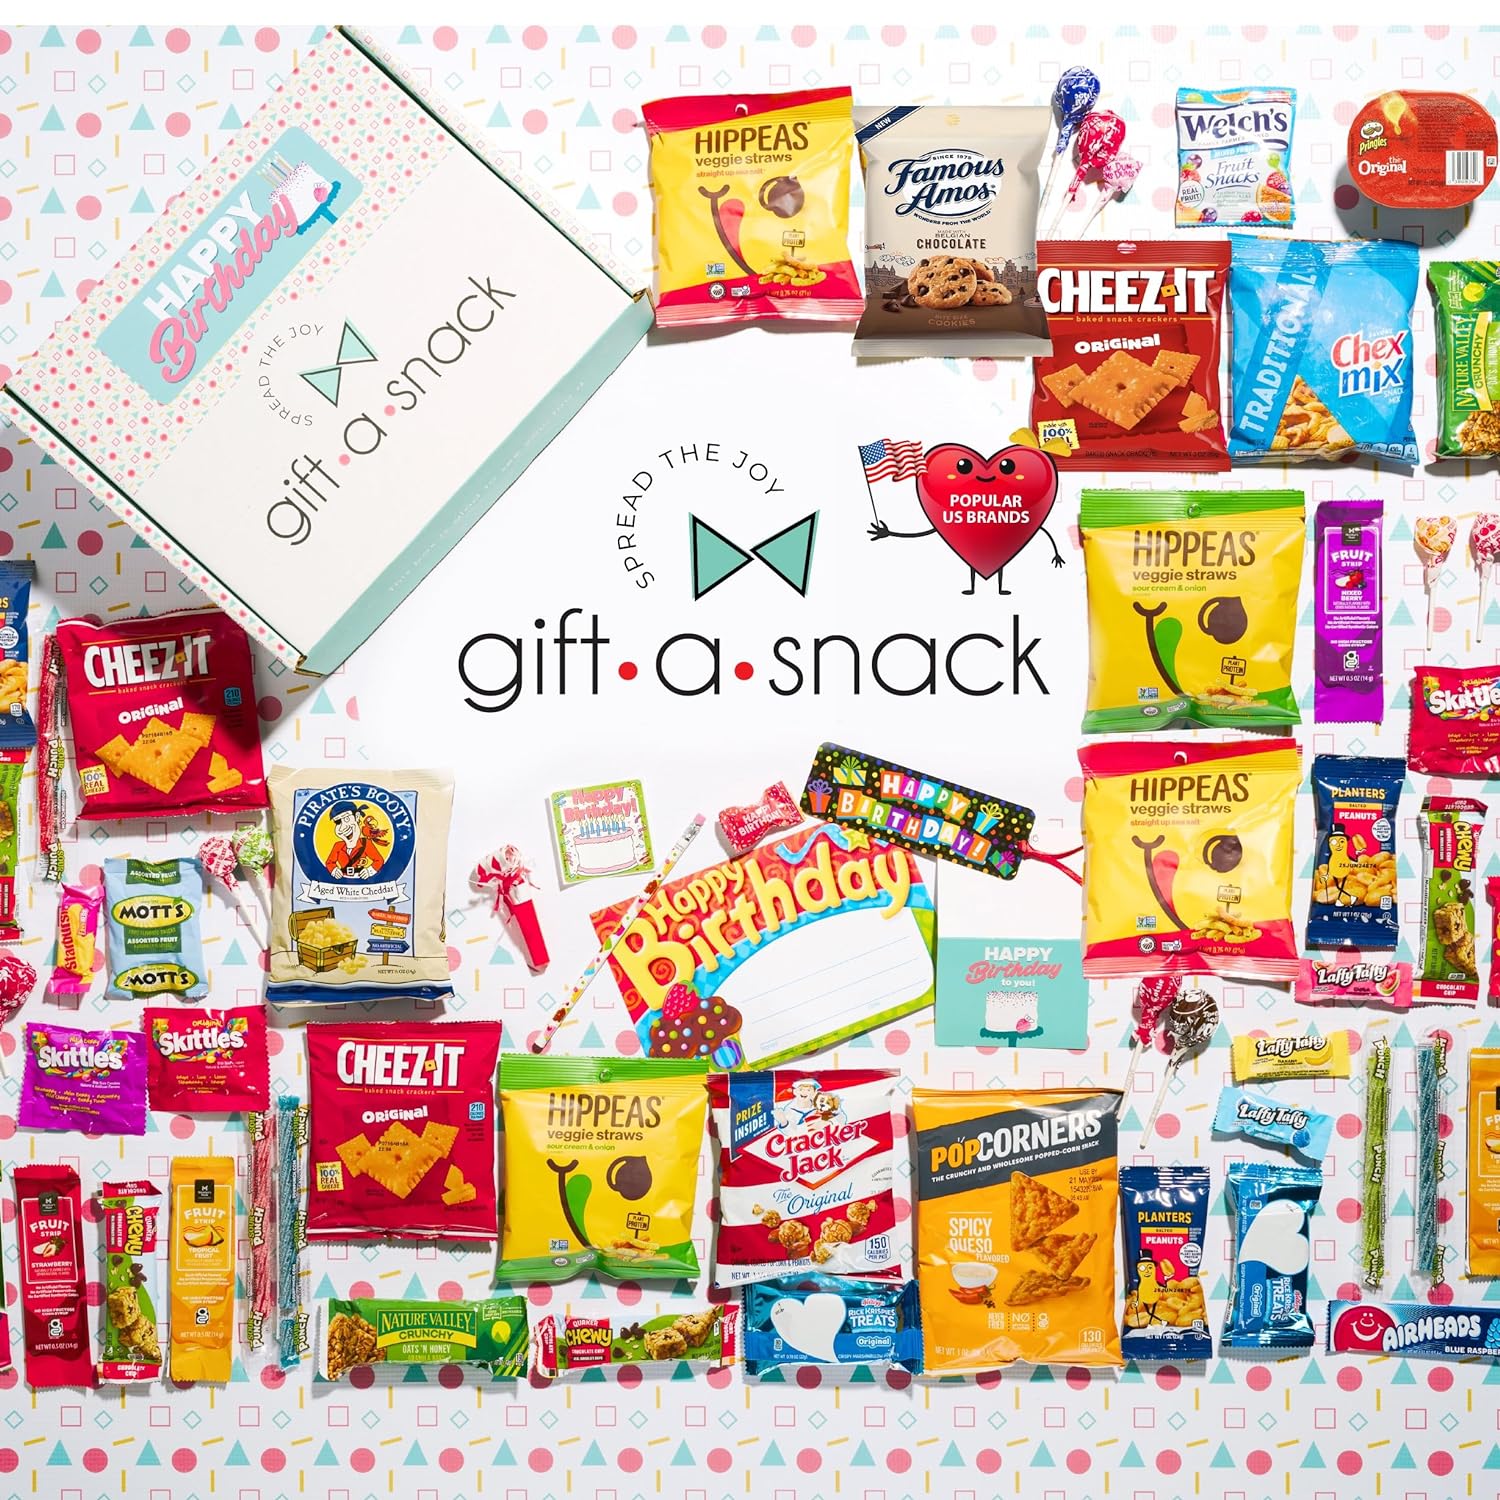 Gift A Snack - Happy Birthday Snack Box Variety Pack Care Package + Greeting Card (45 Count) Bday Sweet Treats Gift Basket, Candies Chips Crackers Bars, Crave Food Assortment - Adults Kids : Grocery & Gourmet Food